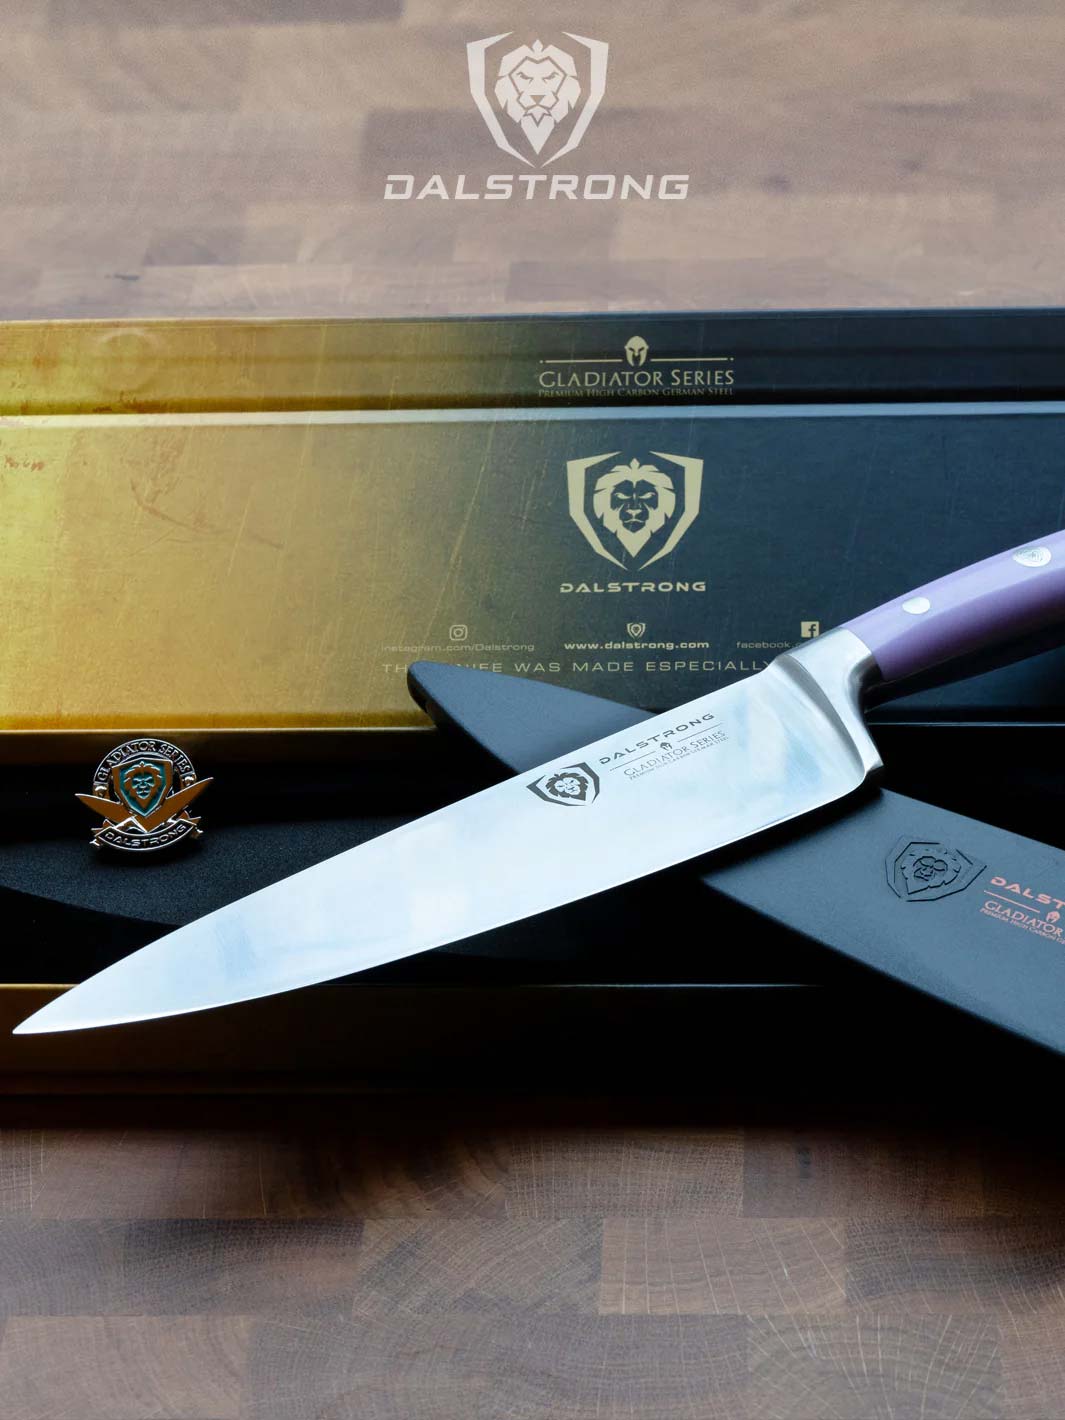 Dalstrong gladiator series 8 inch chef knife with lilac handle and black sheath on top of it's premium packaging.